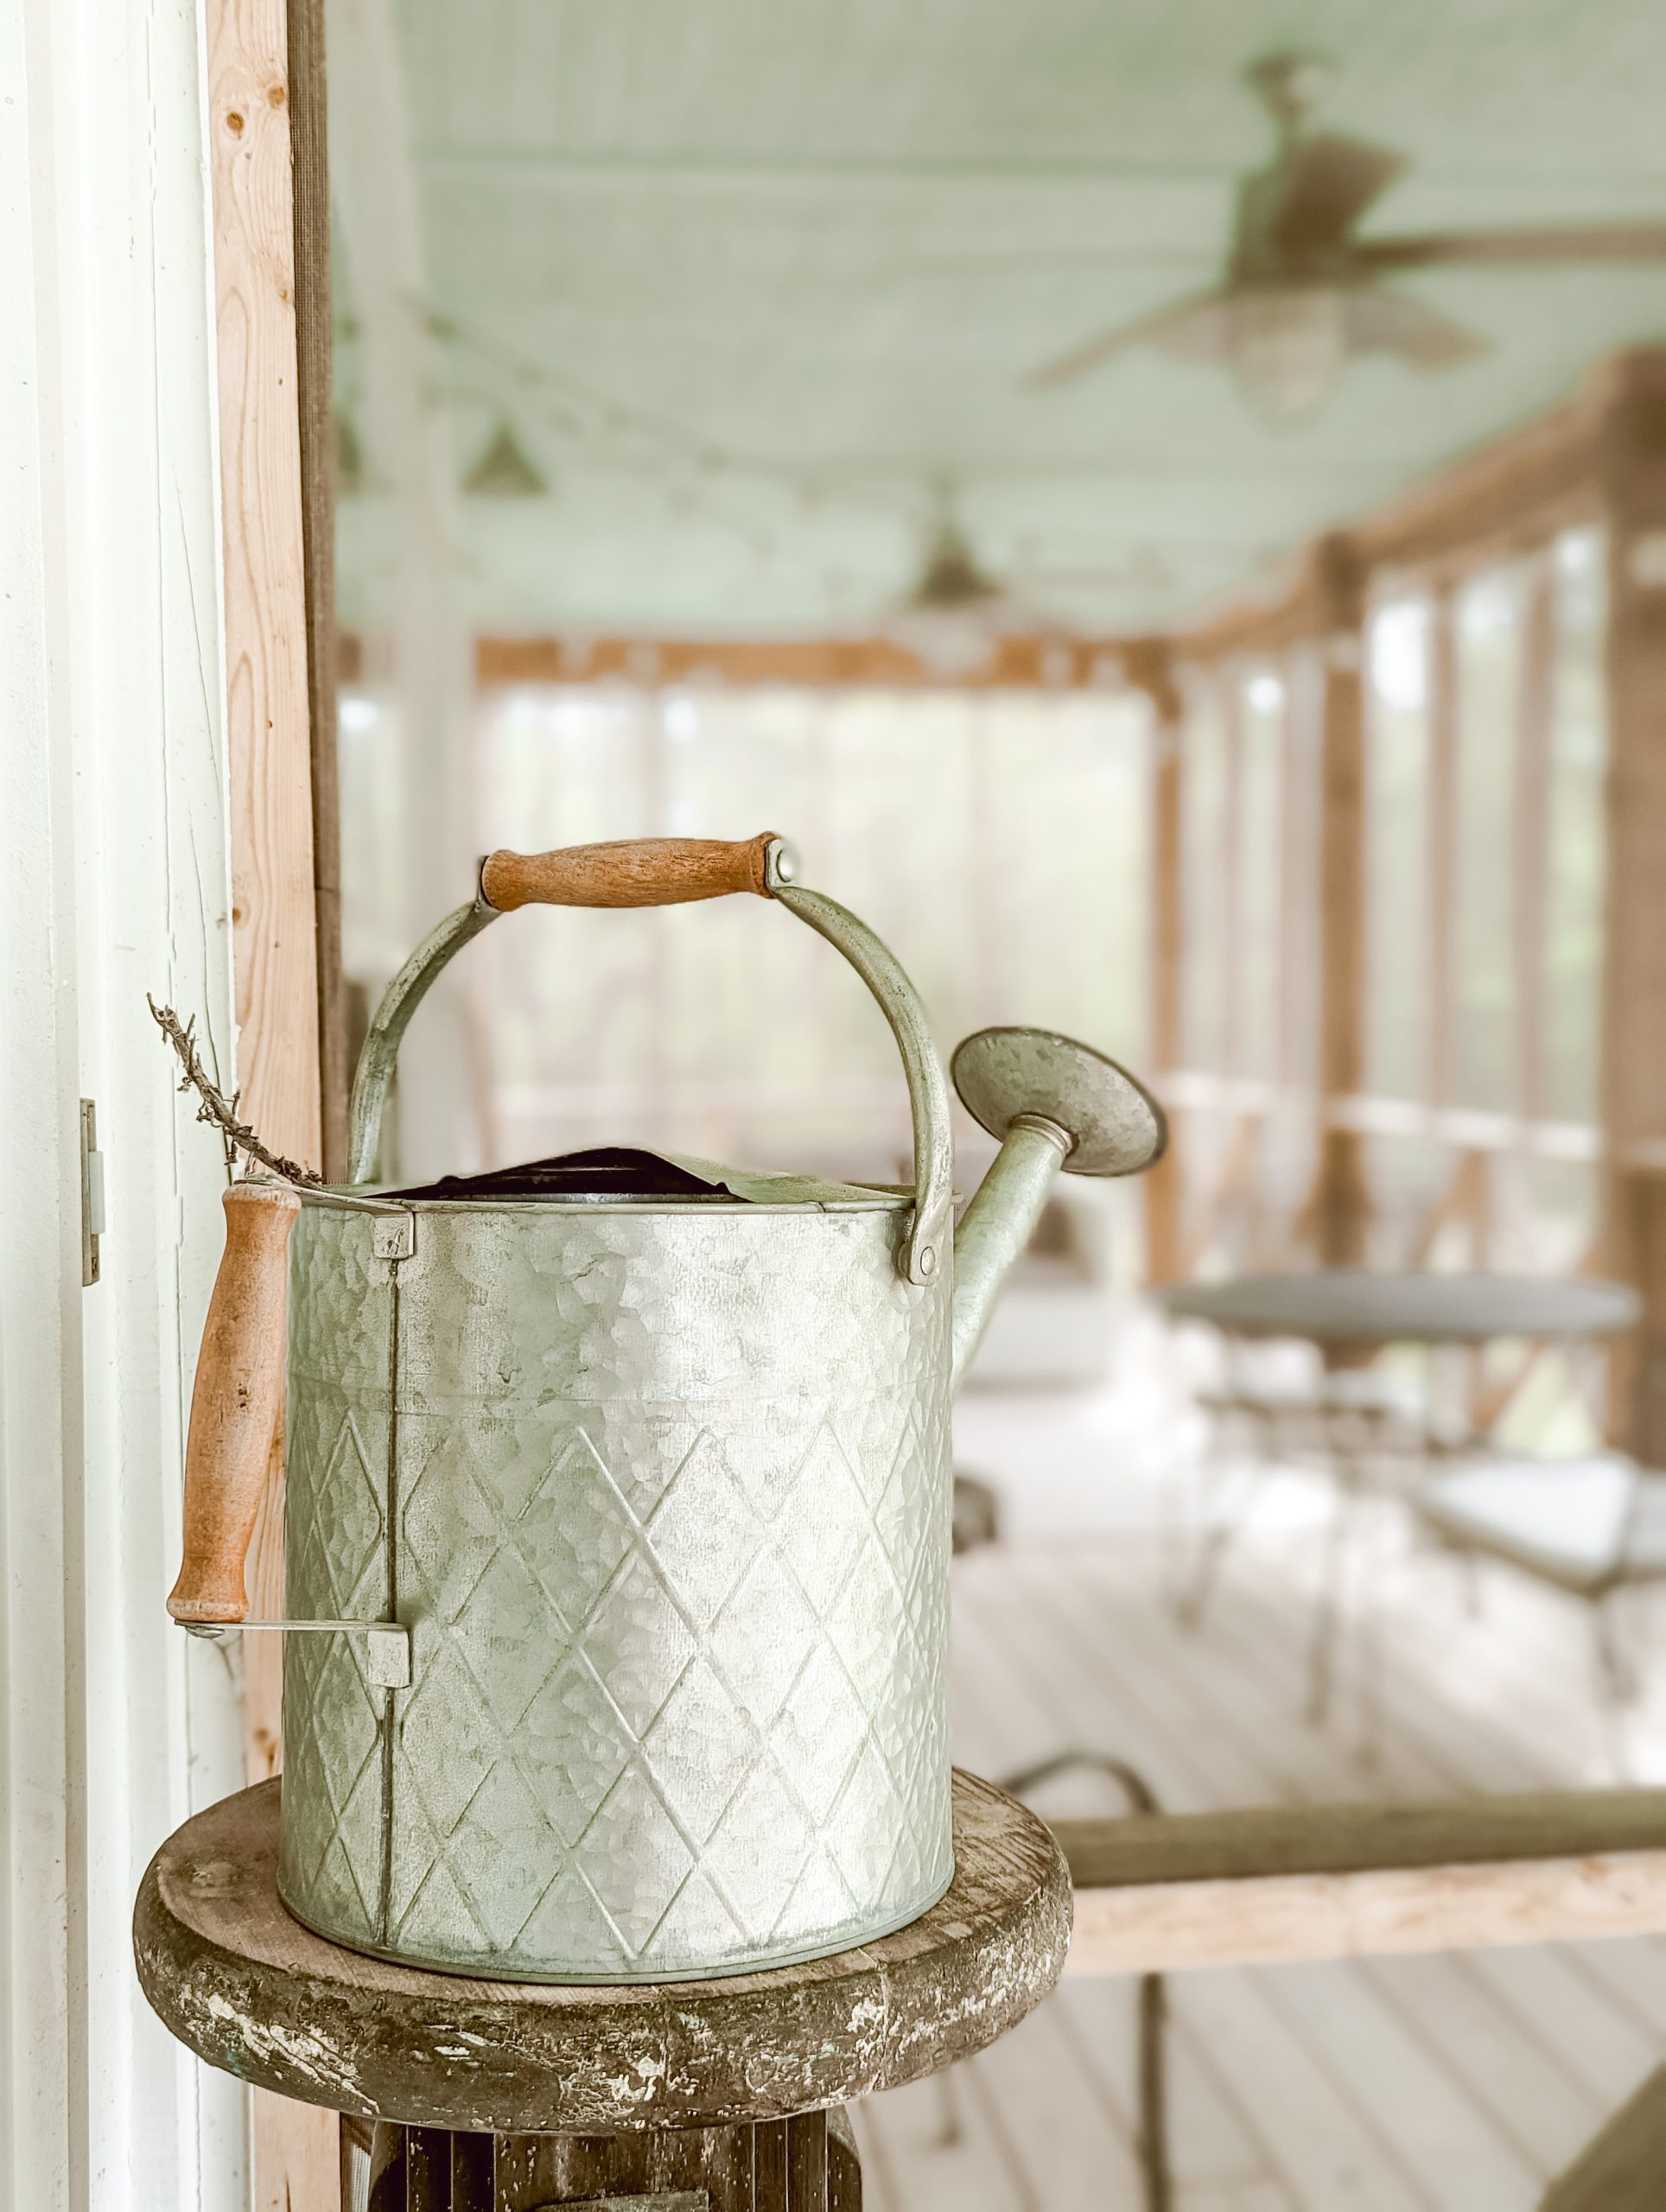 galvanized metal watering can with a twig poking out from the bird's nest inside the watering can